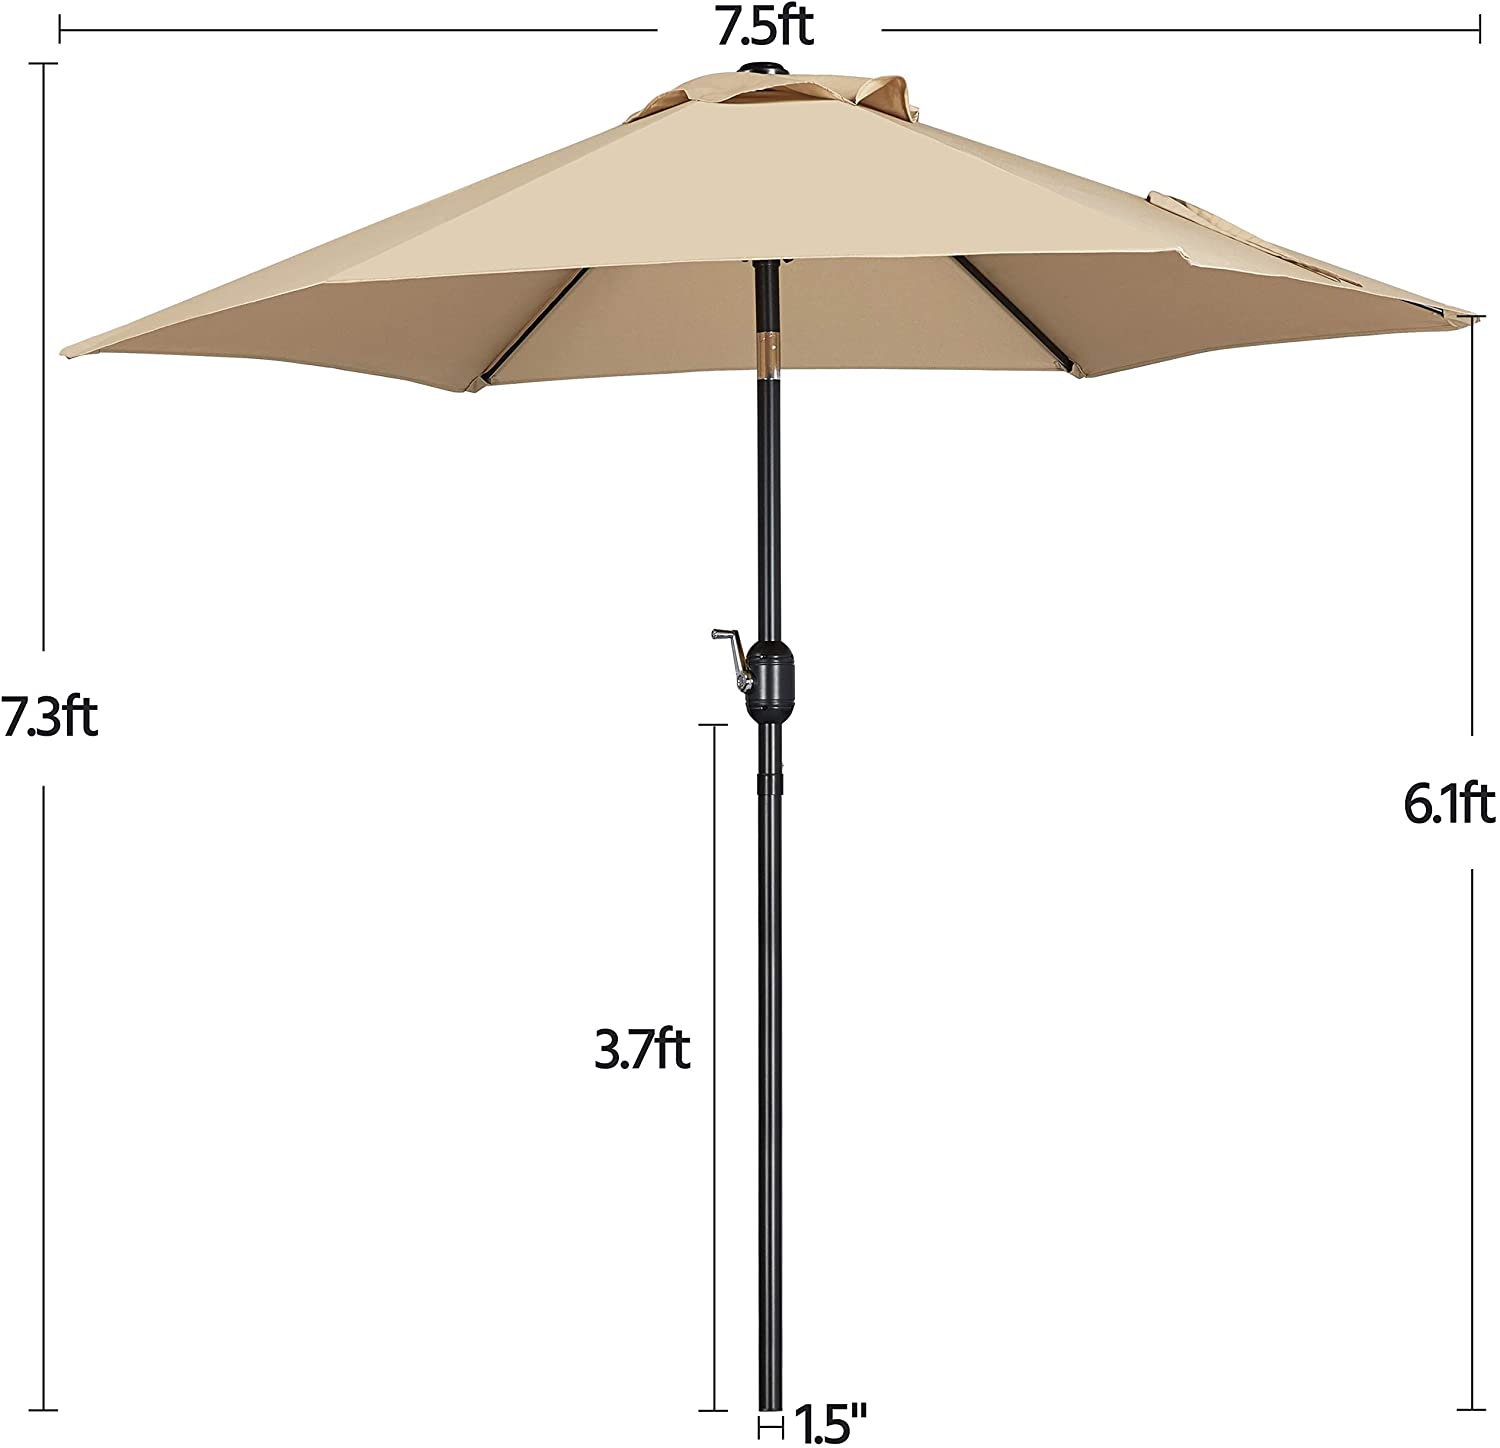 7.5 ft. Market Outdoor Patio Umbrella with Push Button Tilt and Crank in Tan